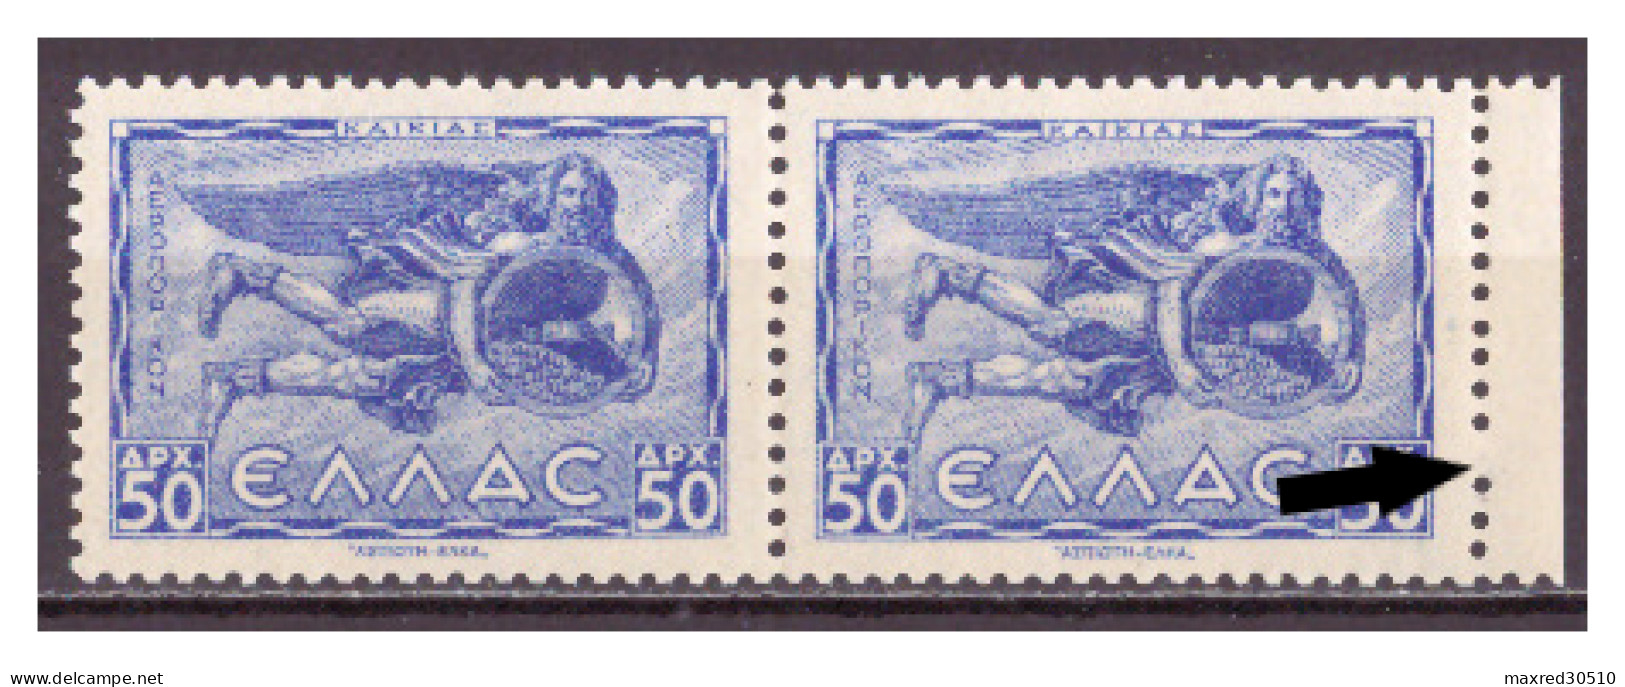 GREECE 1943 AIRPOST ISSUE HORIZONTAL PAIR 50DR. OF "WINDS II" WITH PRINTING ERROR AT THE RIGHT PERFORATION SEE DESCRIBE - Errors, Freaks & Oddities (EFO)